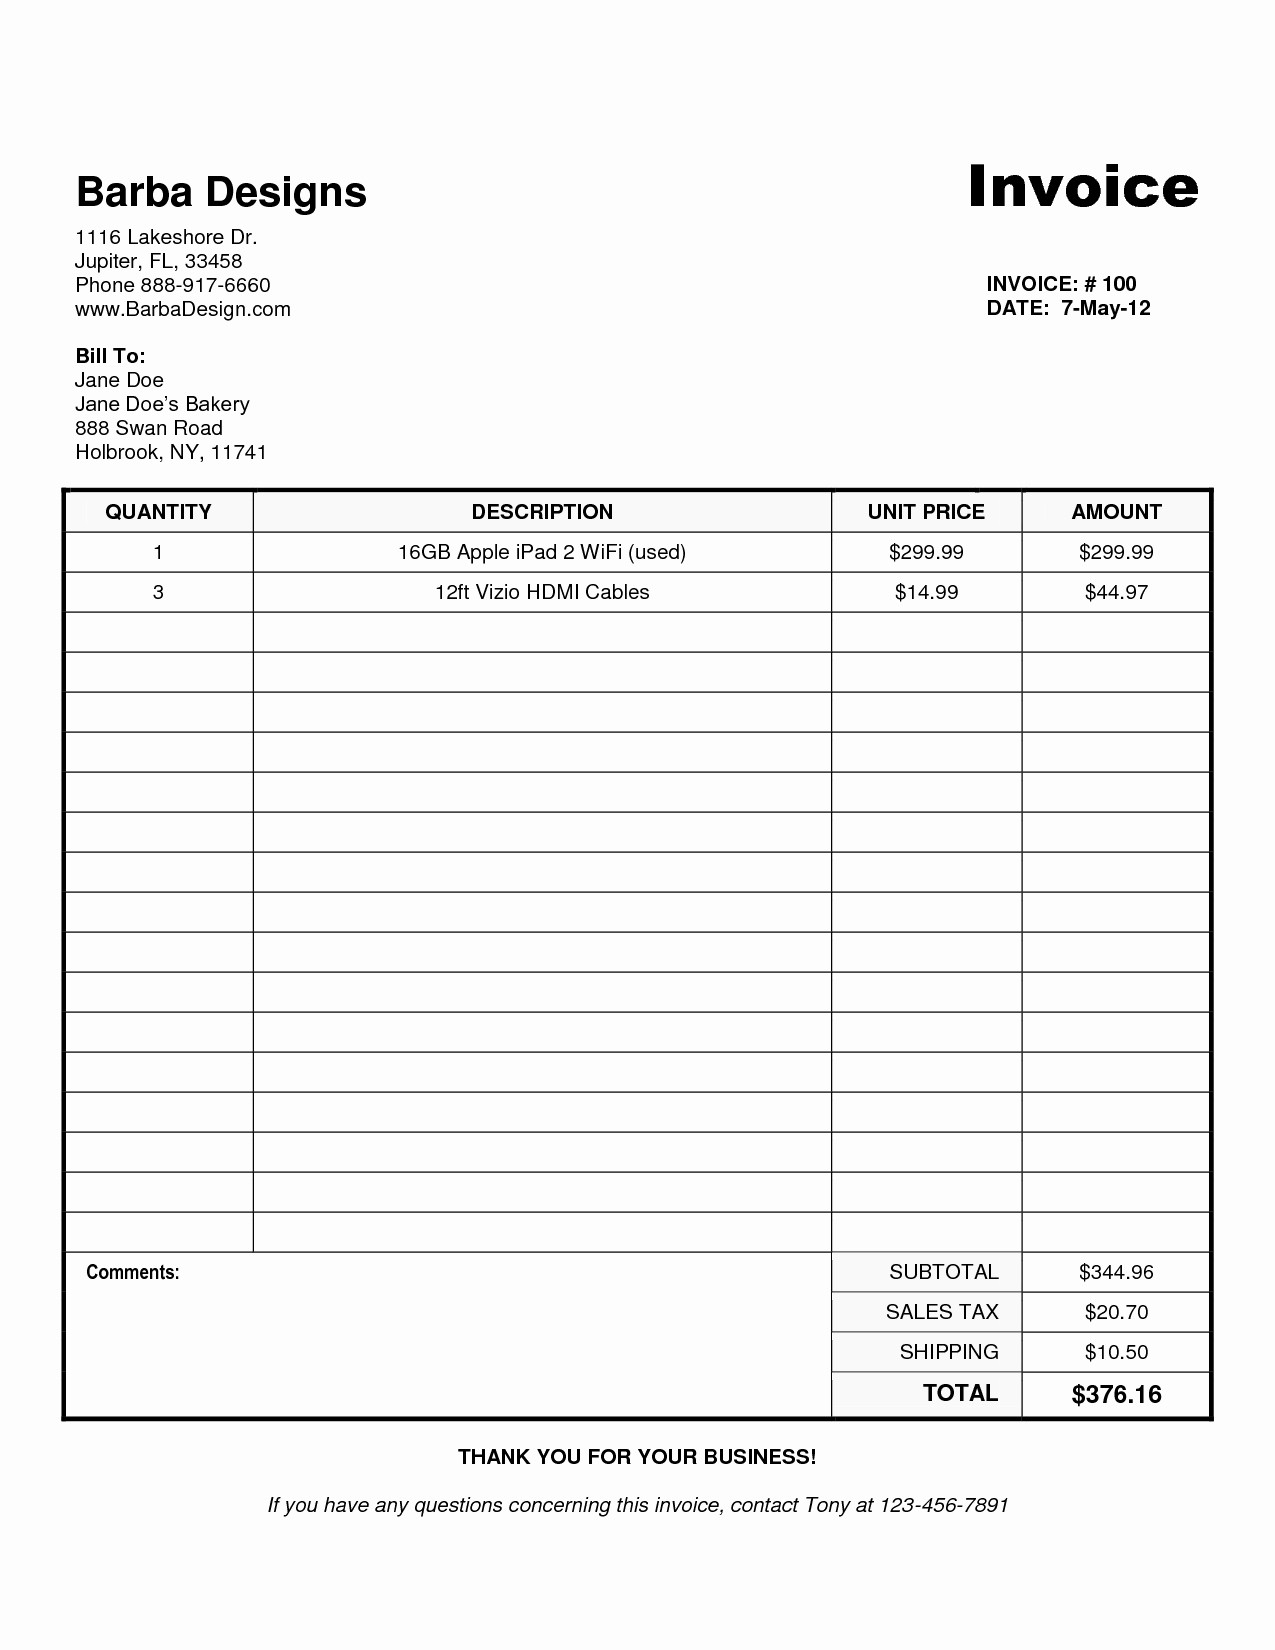 Free Templates for Invoices Printable Inspirational Invoice Free Template Invoice Template Ideas